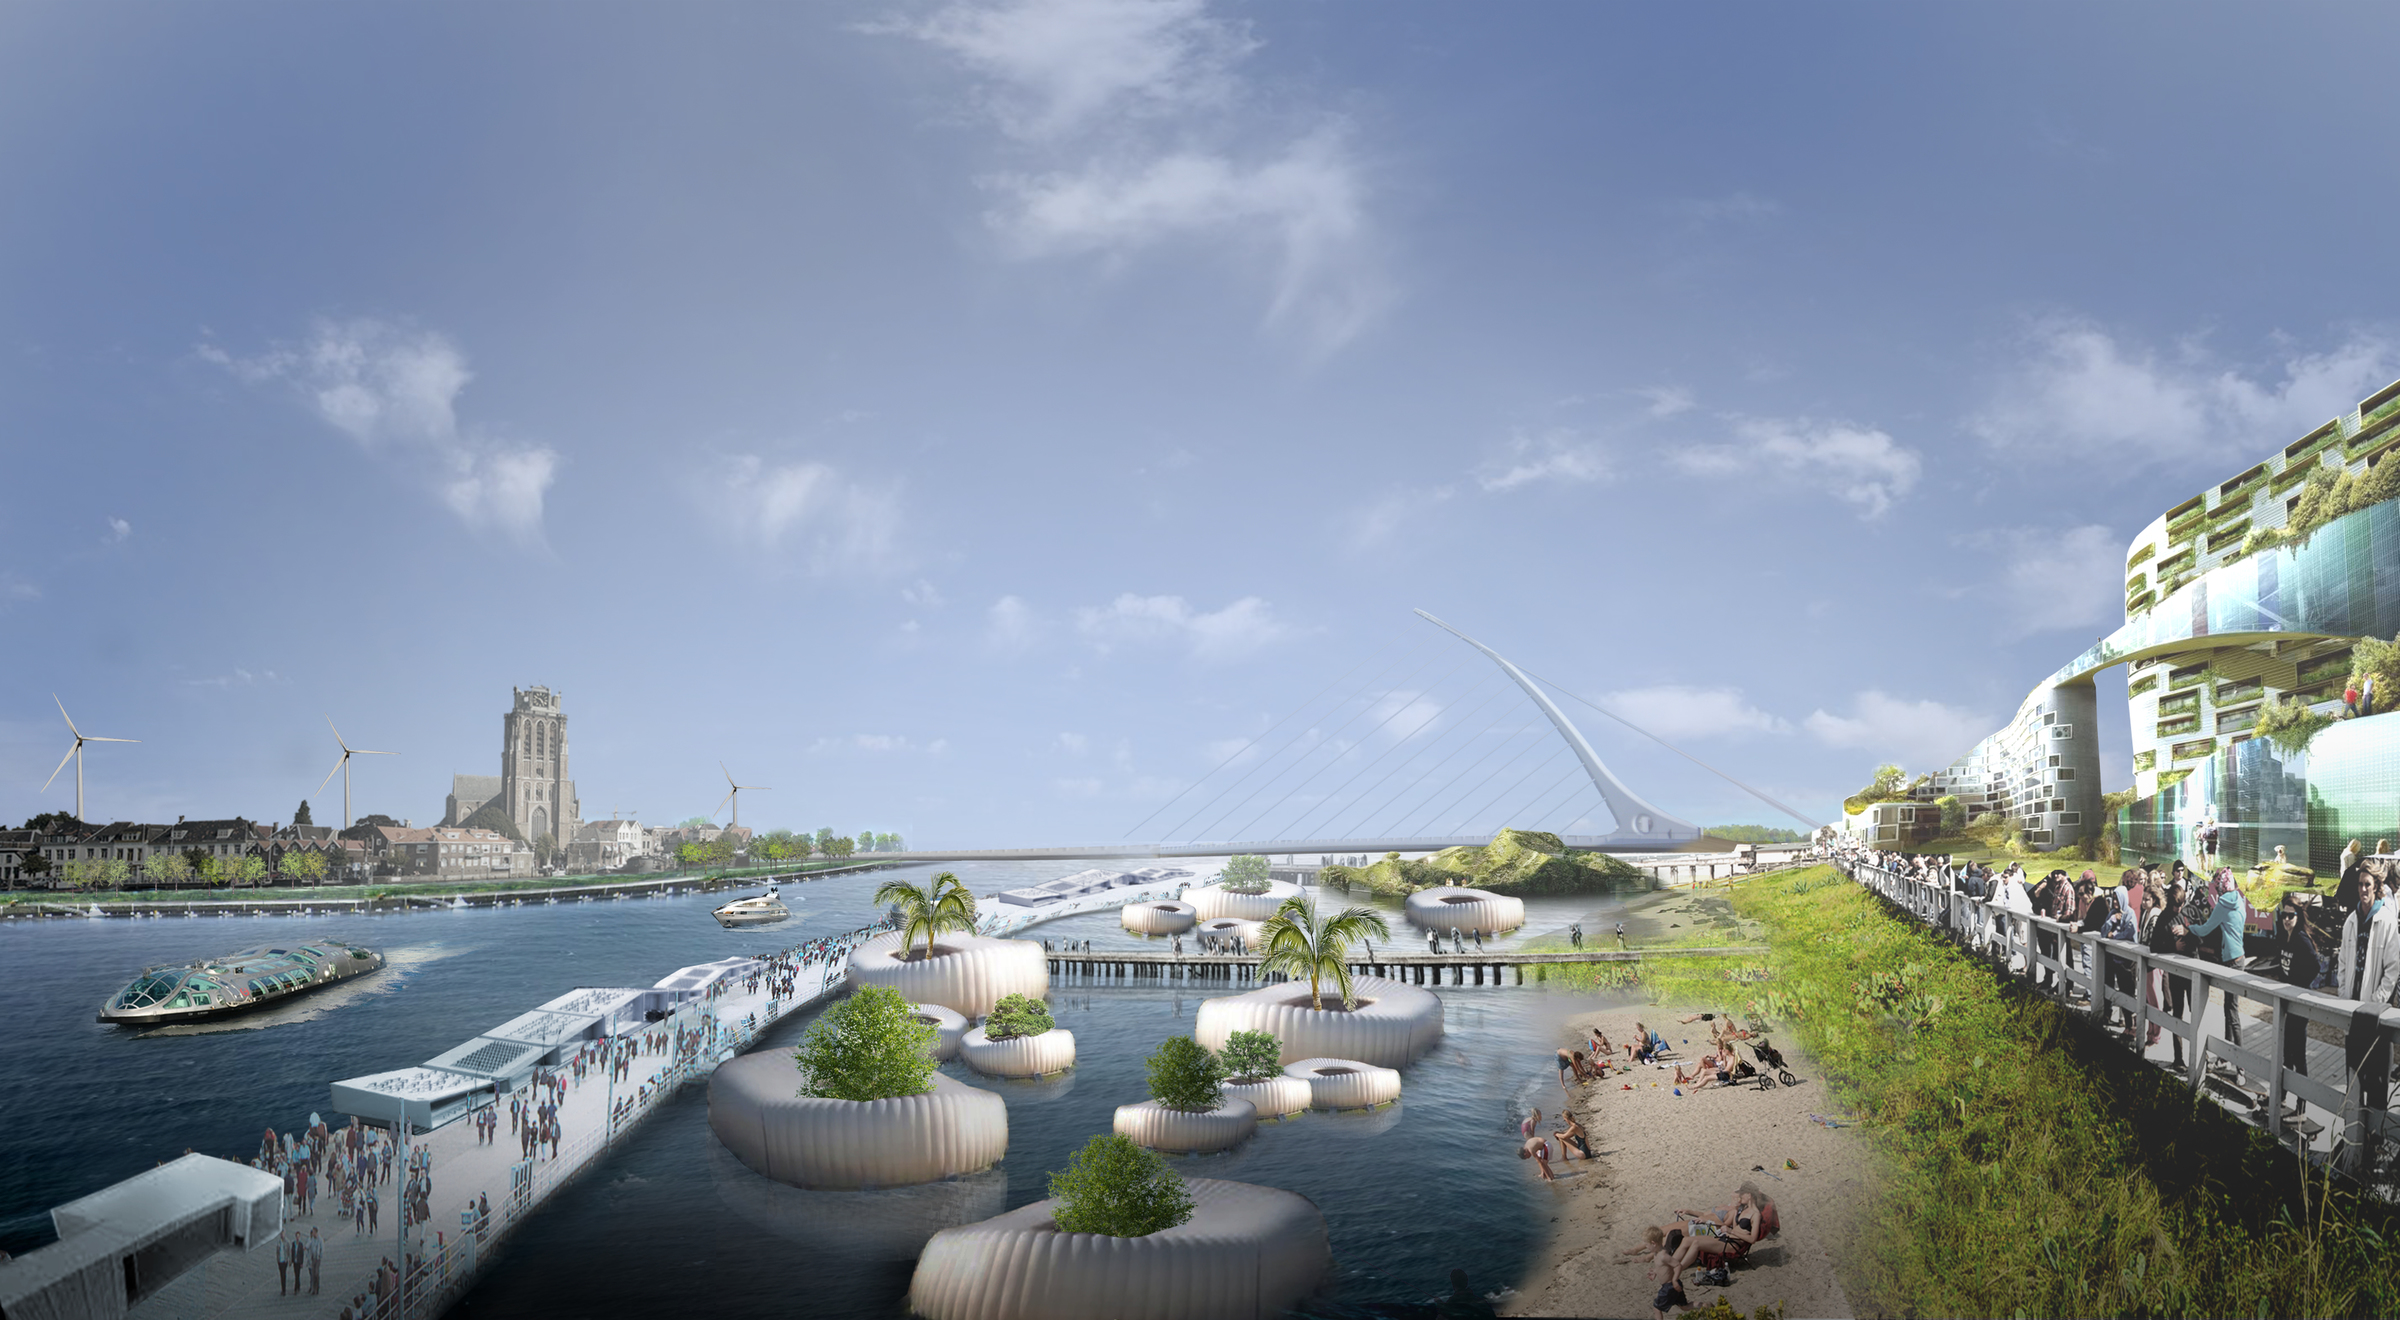 Full: The river as an important part of public space